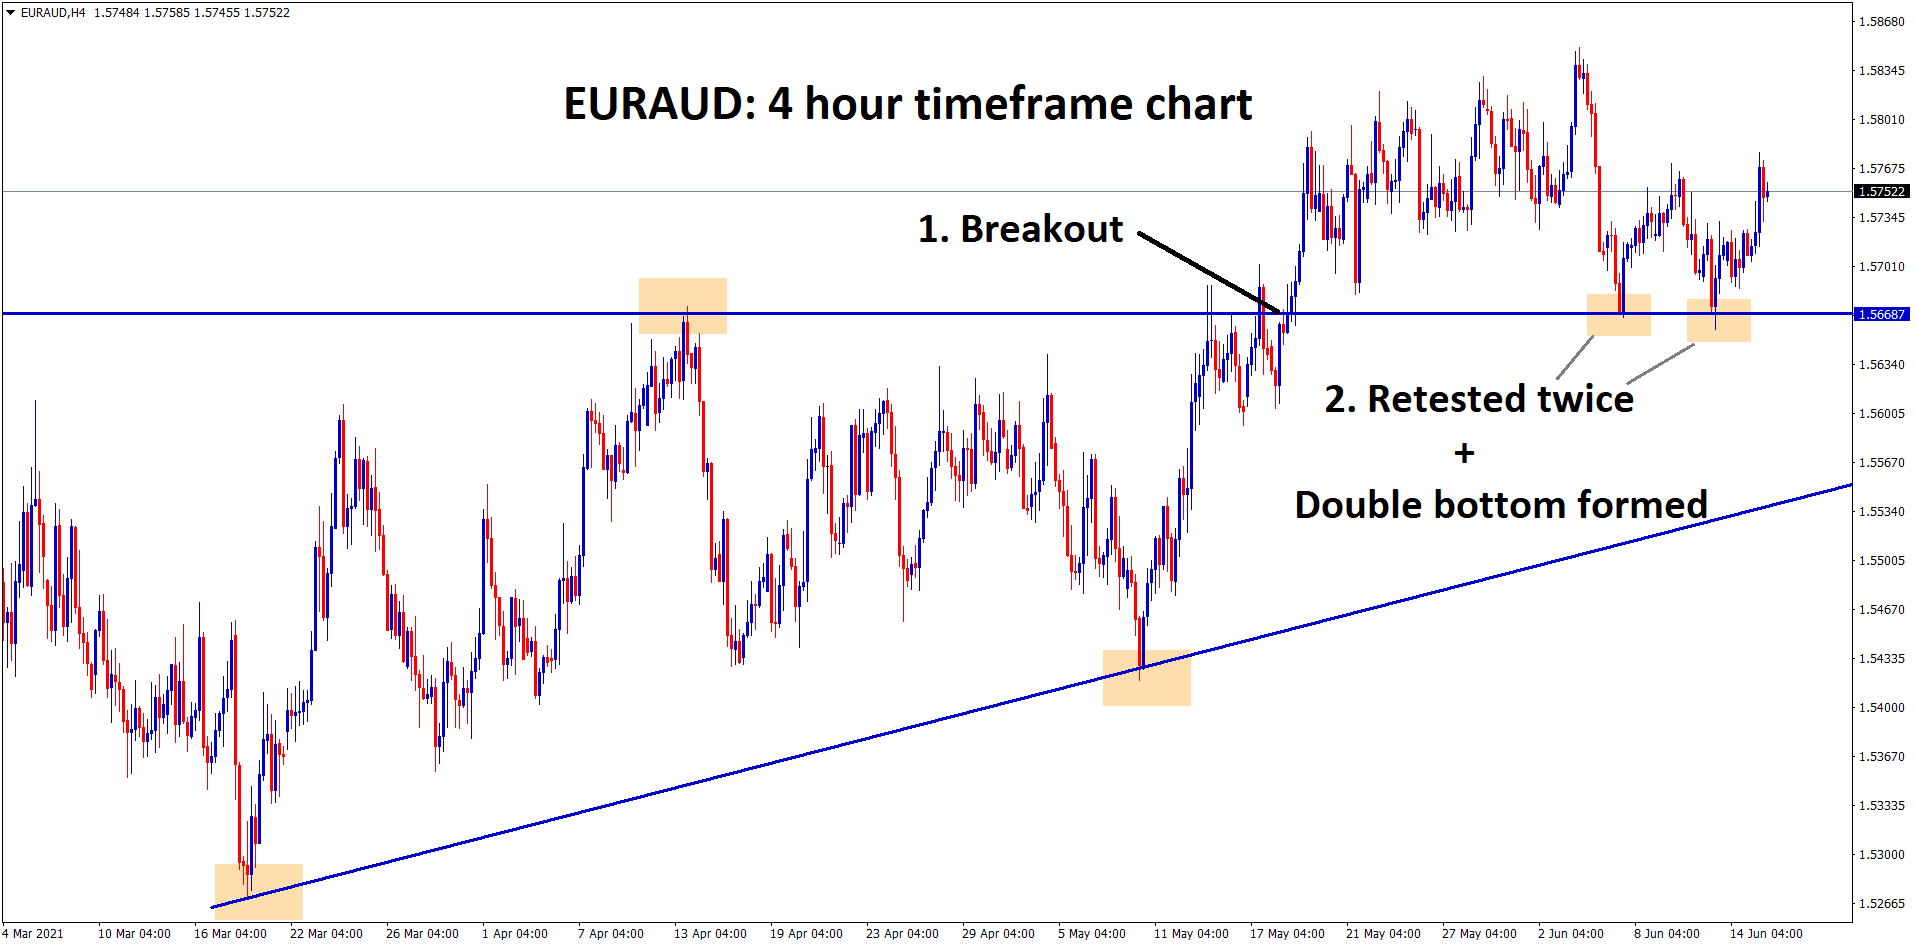 EURAUD has formed a double bottom after retesting the broken level of Ascending Triangle